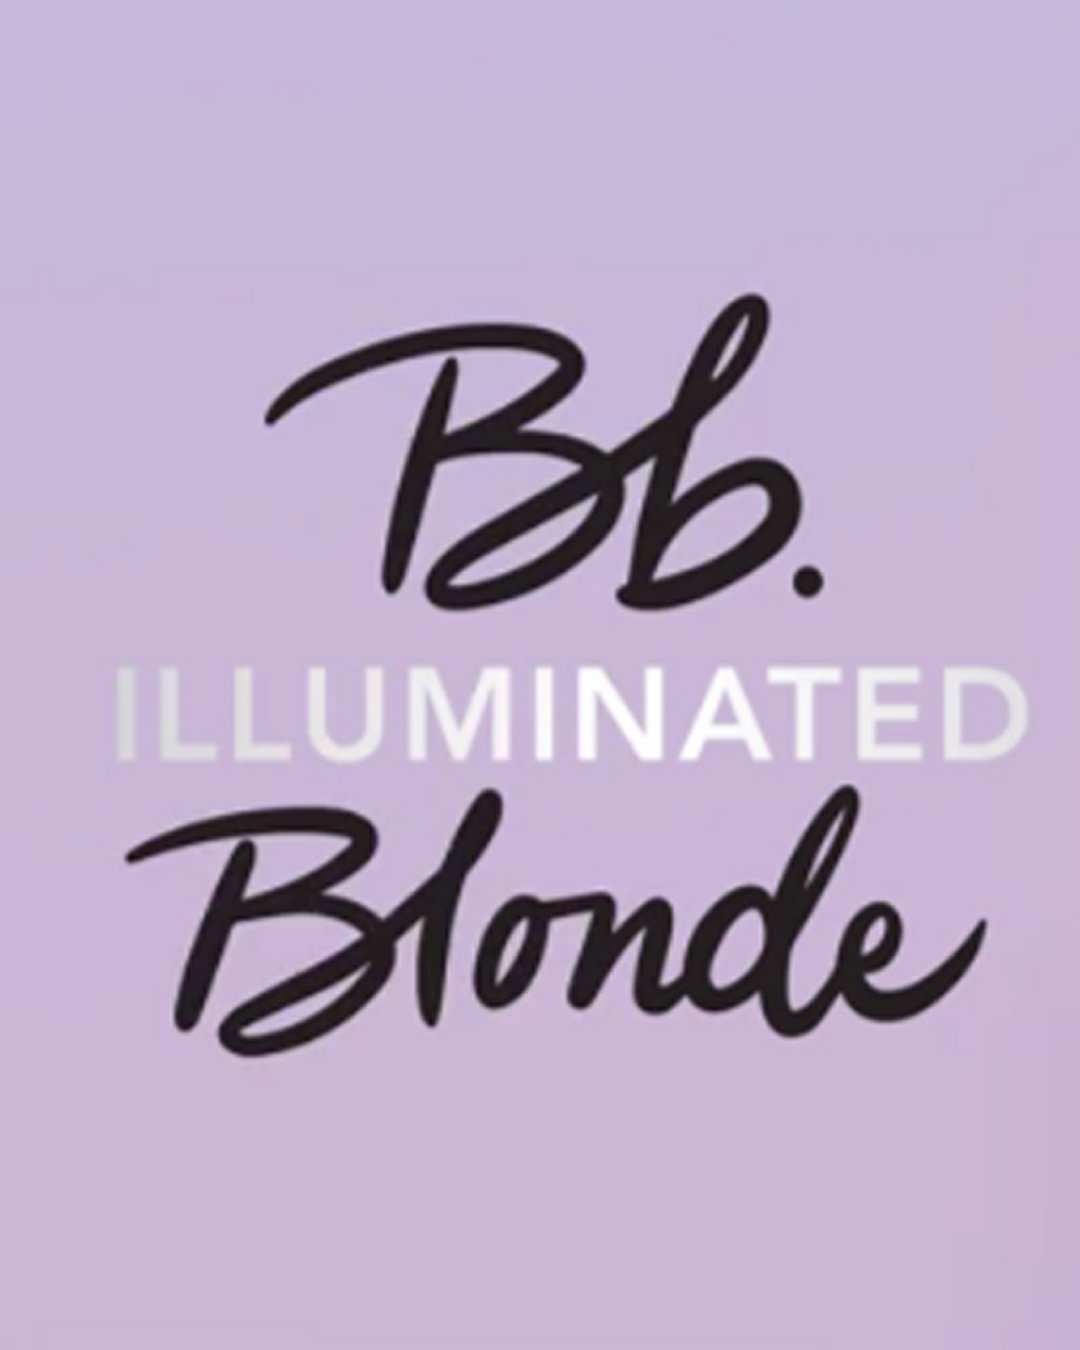 Bumble and bumble Partners With Pop Star Kim Petras and Singer-Songwriter Rileyy Lanez to Celebrate the Launch of Bb.Illuminated Blonde Collection